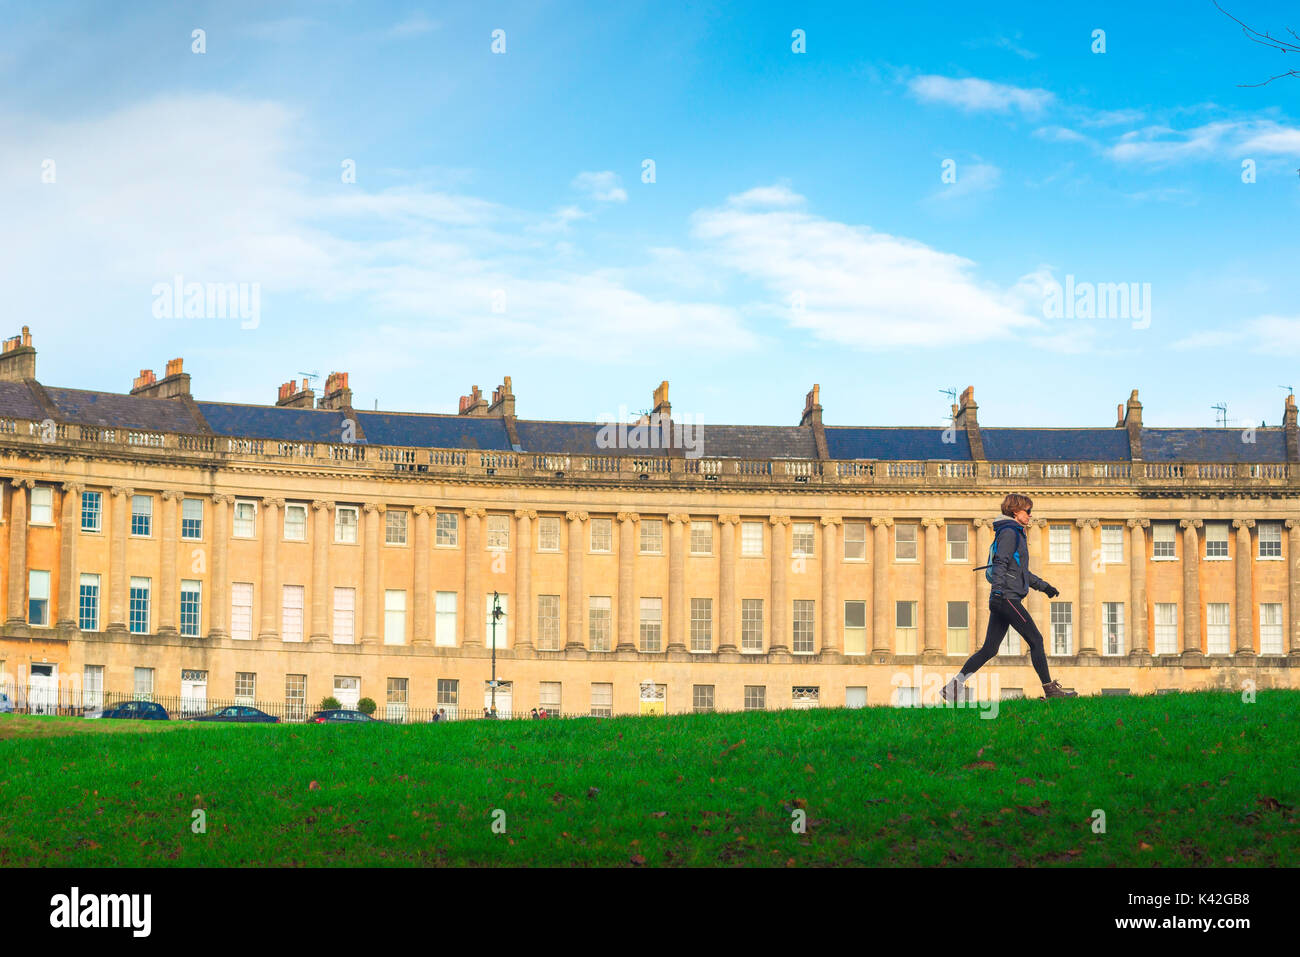 Woman walking city, against the backdrop of the Royal Crescent a solo woman walks briskly through Victoria Park in the centre of Bath, UK. Stock Photo